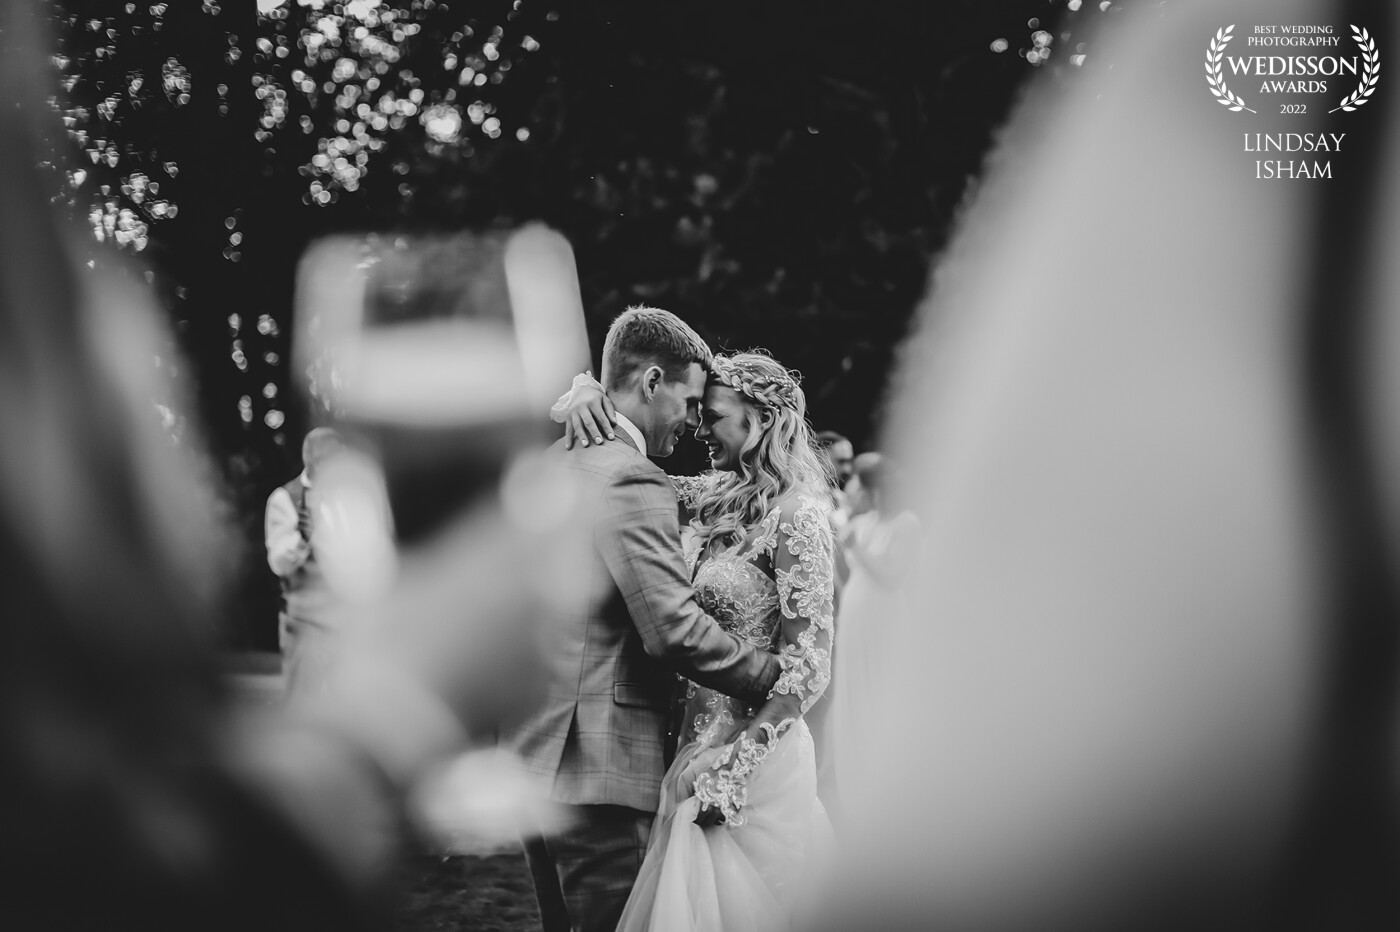 This special moment was actually Jess & Danny's "outdoor" first dance at the stunningly beautiful Cleatham Hall.  With all eyes gazing on this gorgeous pair, I can't help but think that this looks like such a private moment.  Jess & Danny had such a magical day and I honestly couldn't be happier for them with this winning black and white beauty!